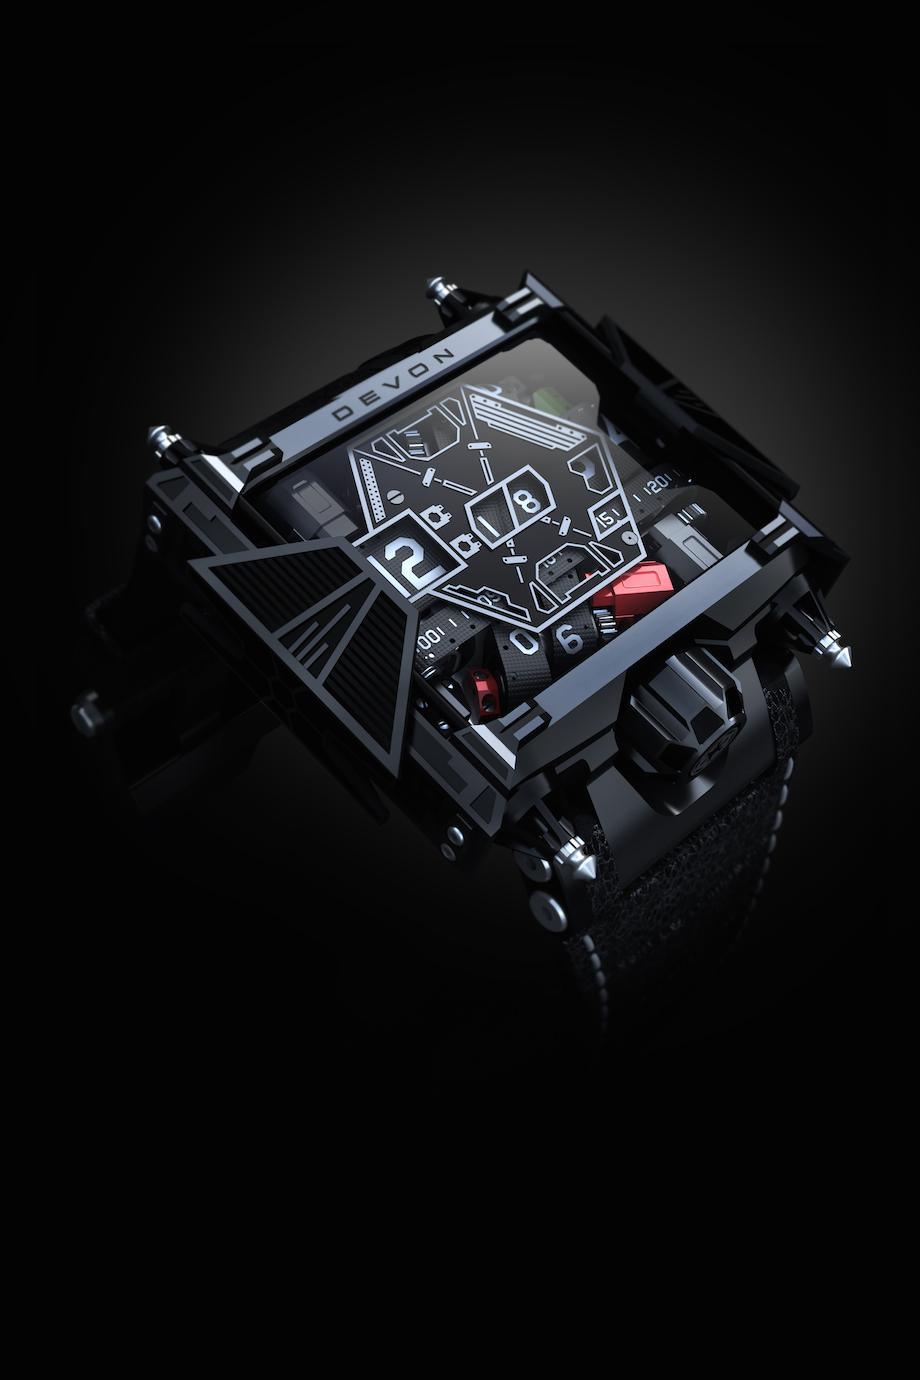 With 350 individual parts, stainless steal plating, and scratch-resistant polycarbonate lens with bulletproof durability this watch is like having an actual spaceship on your wrist.